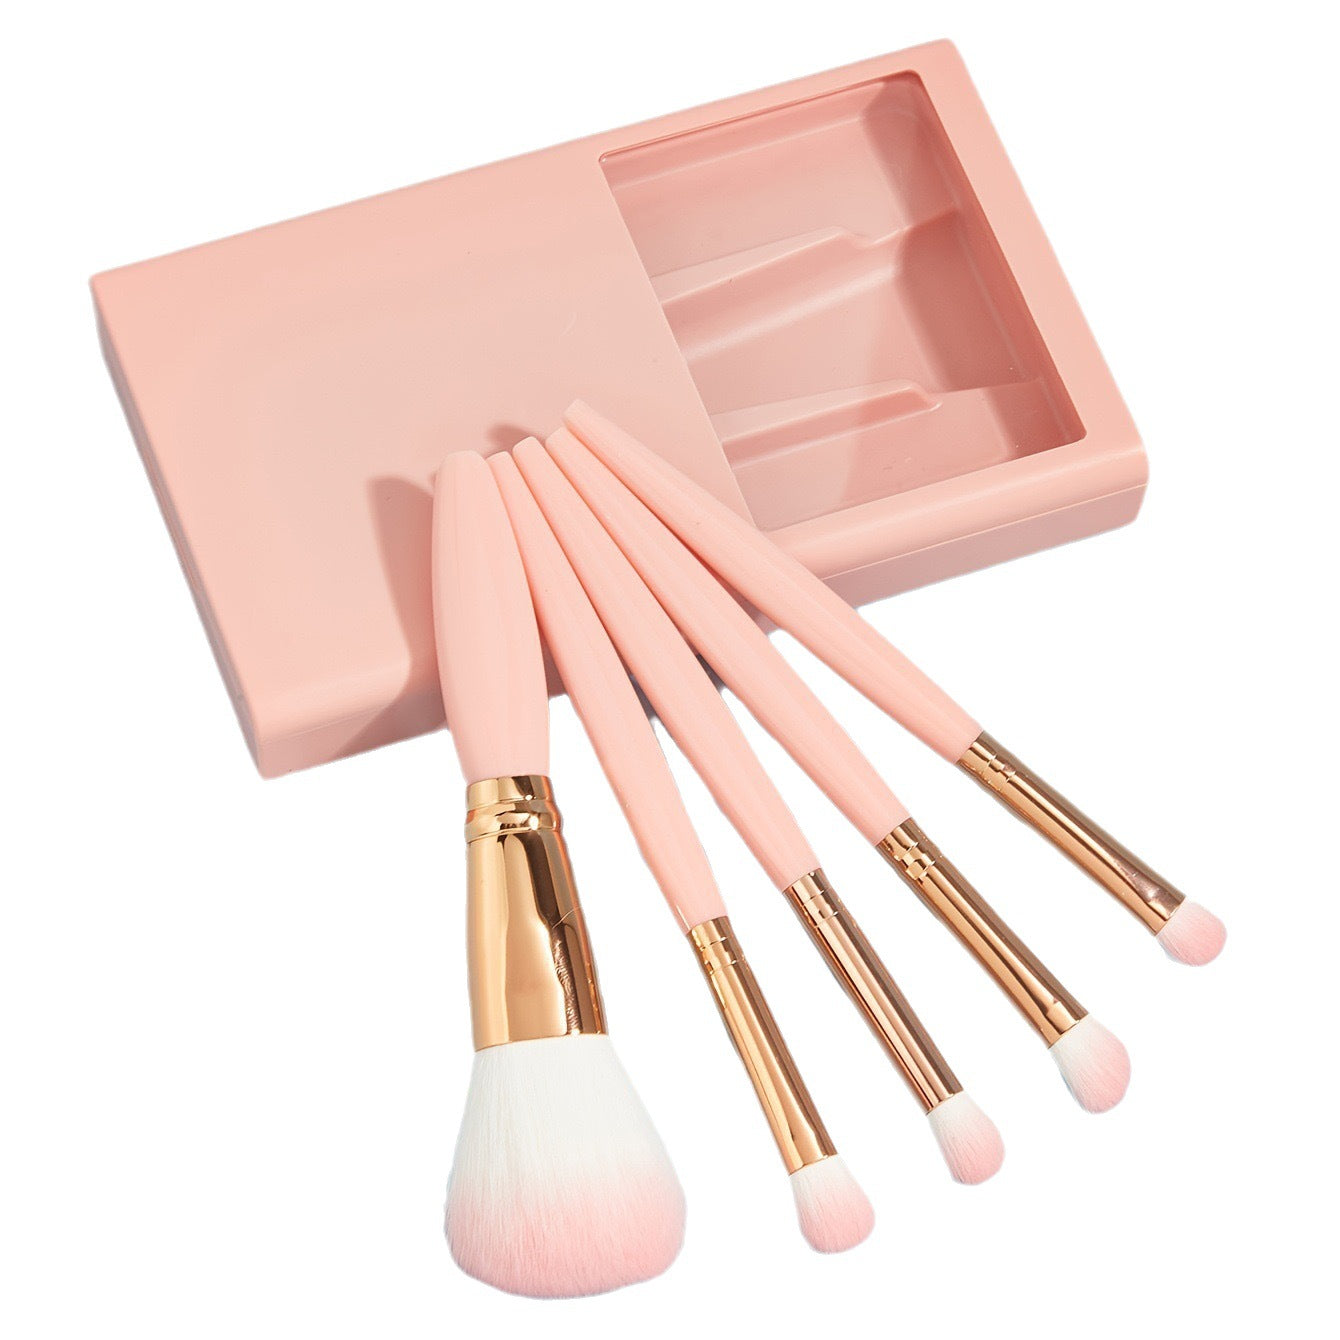 Travel-Friendly: 5-Piece Makeup Brushes Set with Mirror